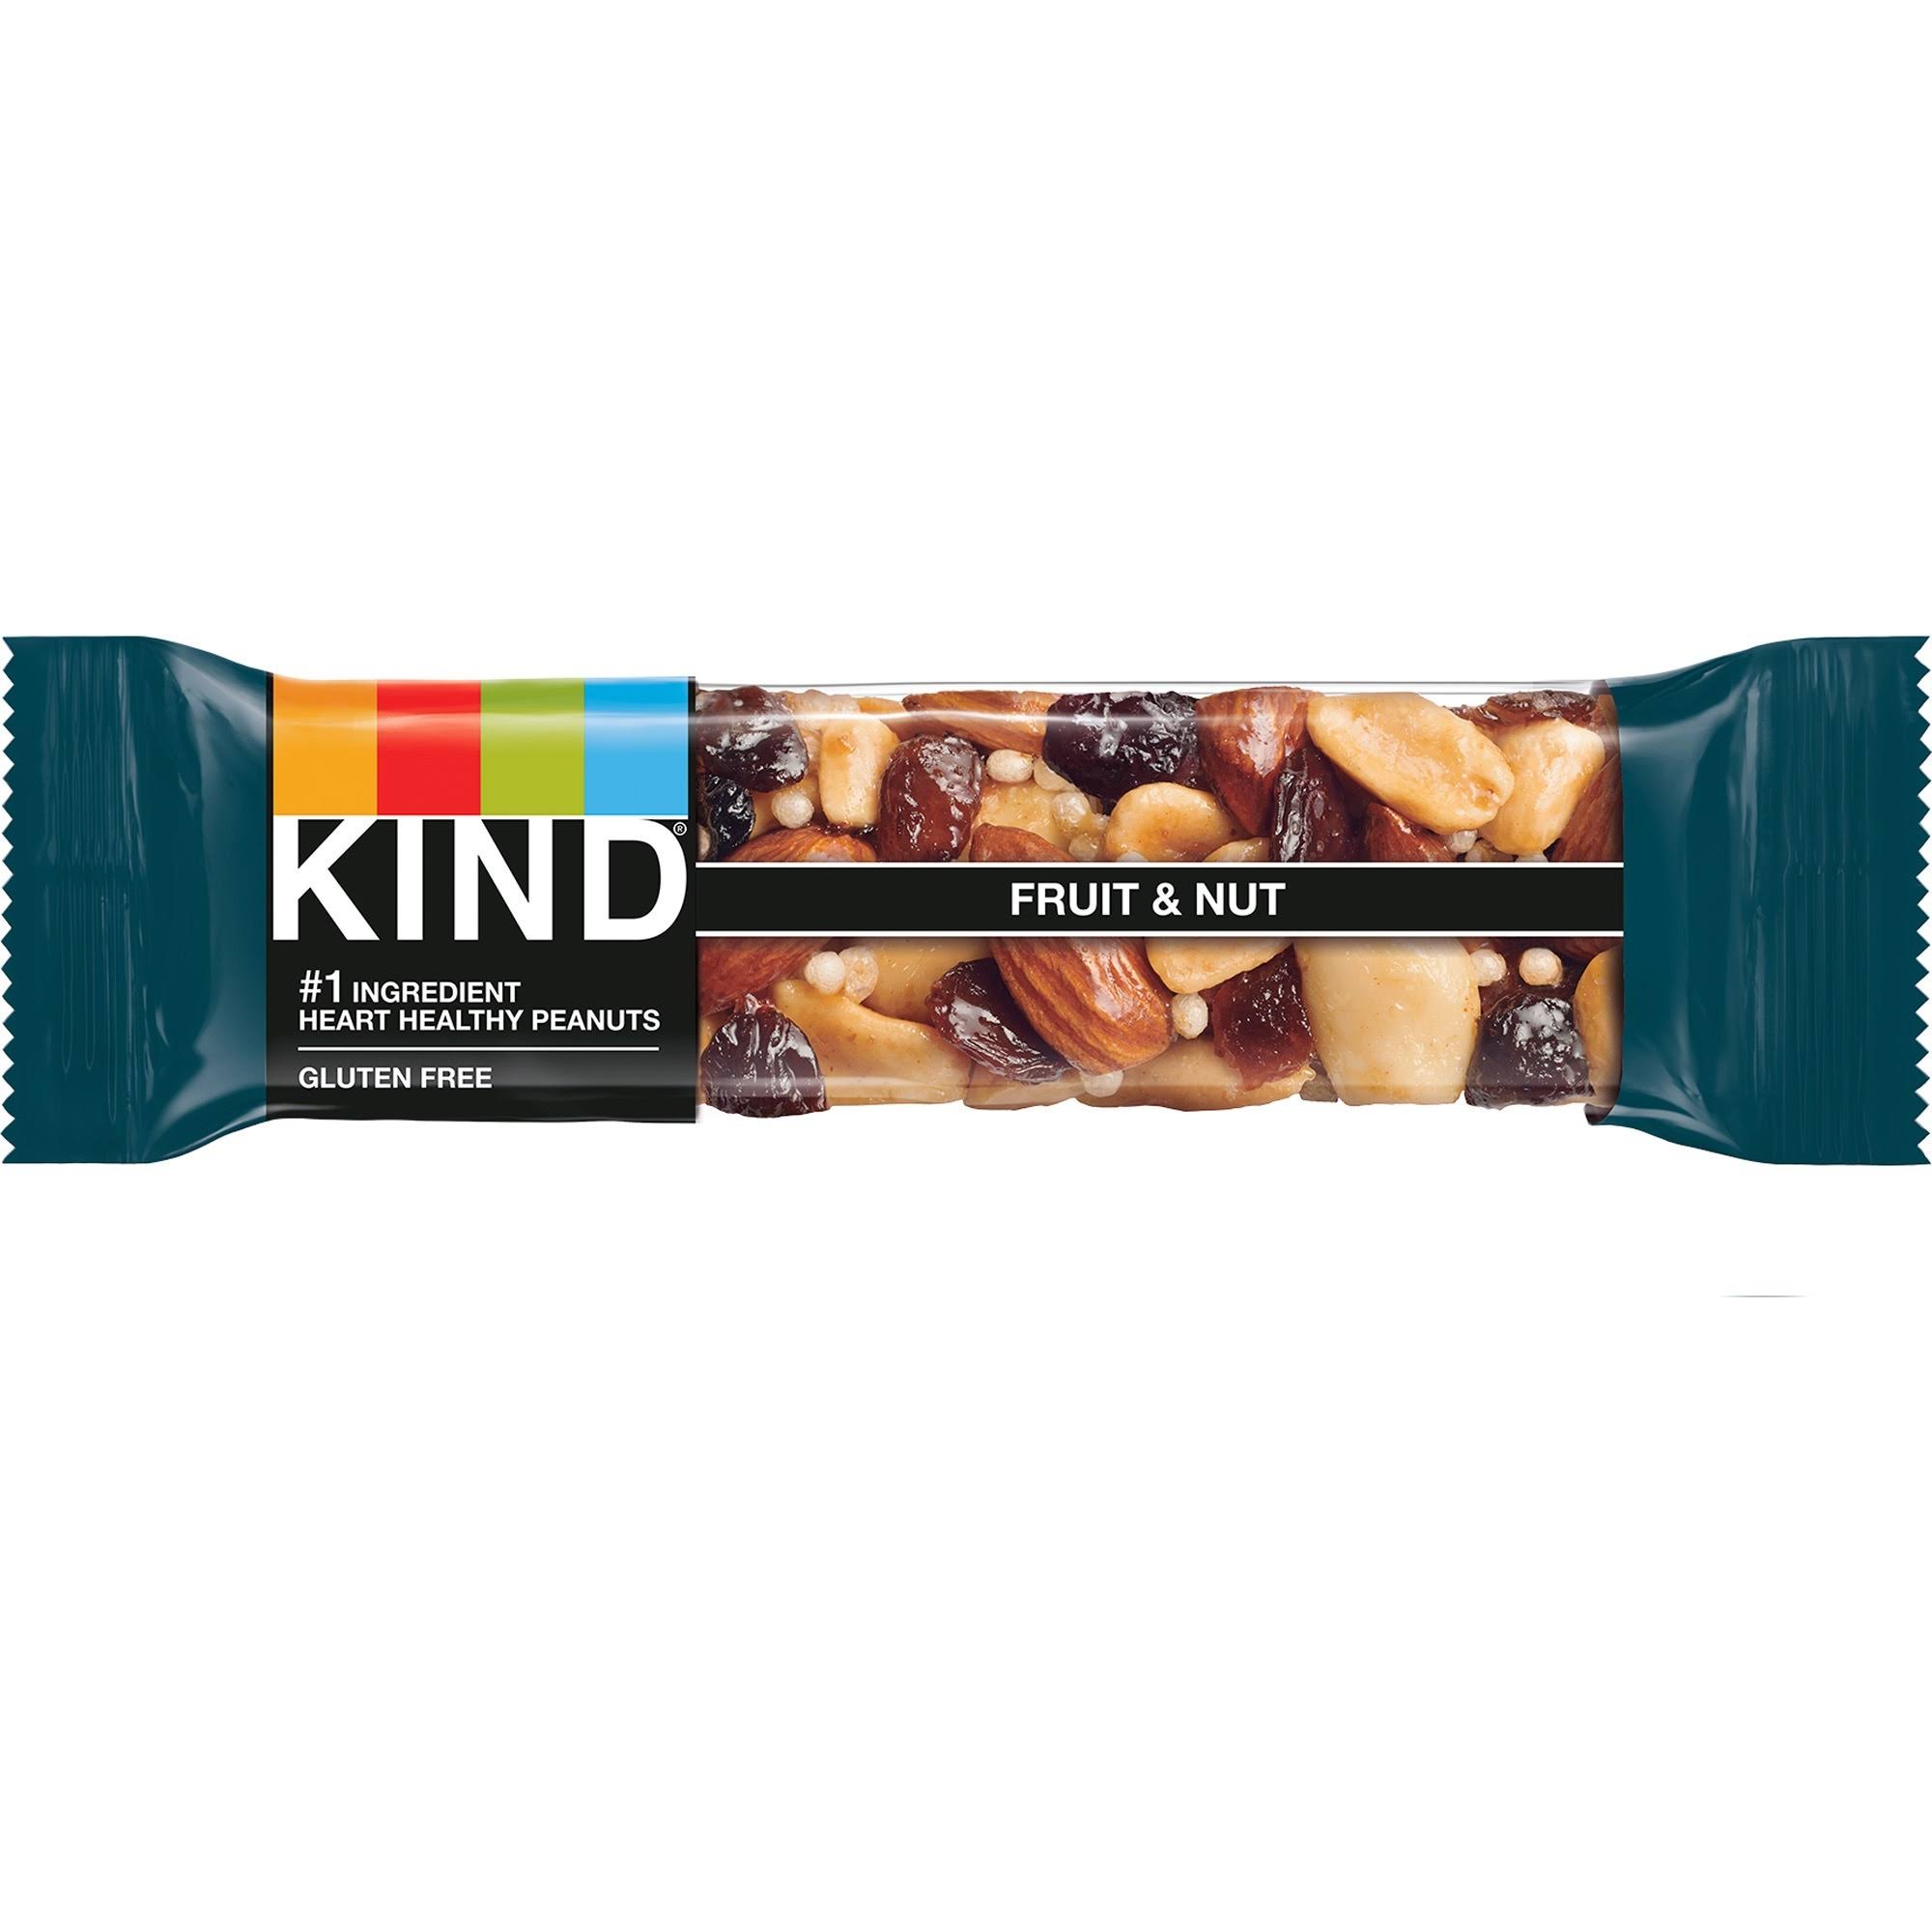 Kind Healthy Snack Bars - Fruit and Nut Delight, 1.4oz